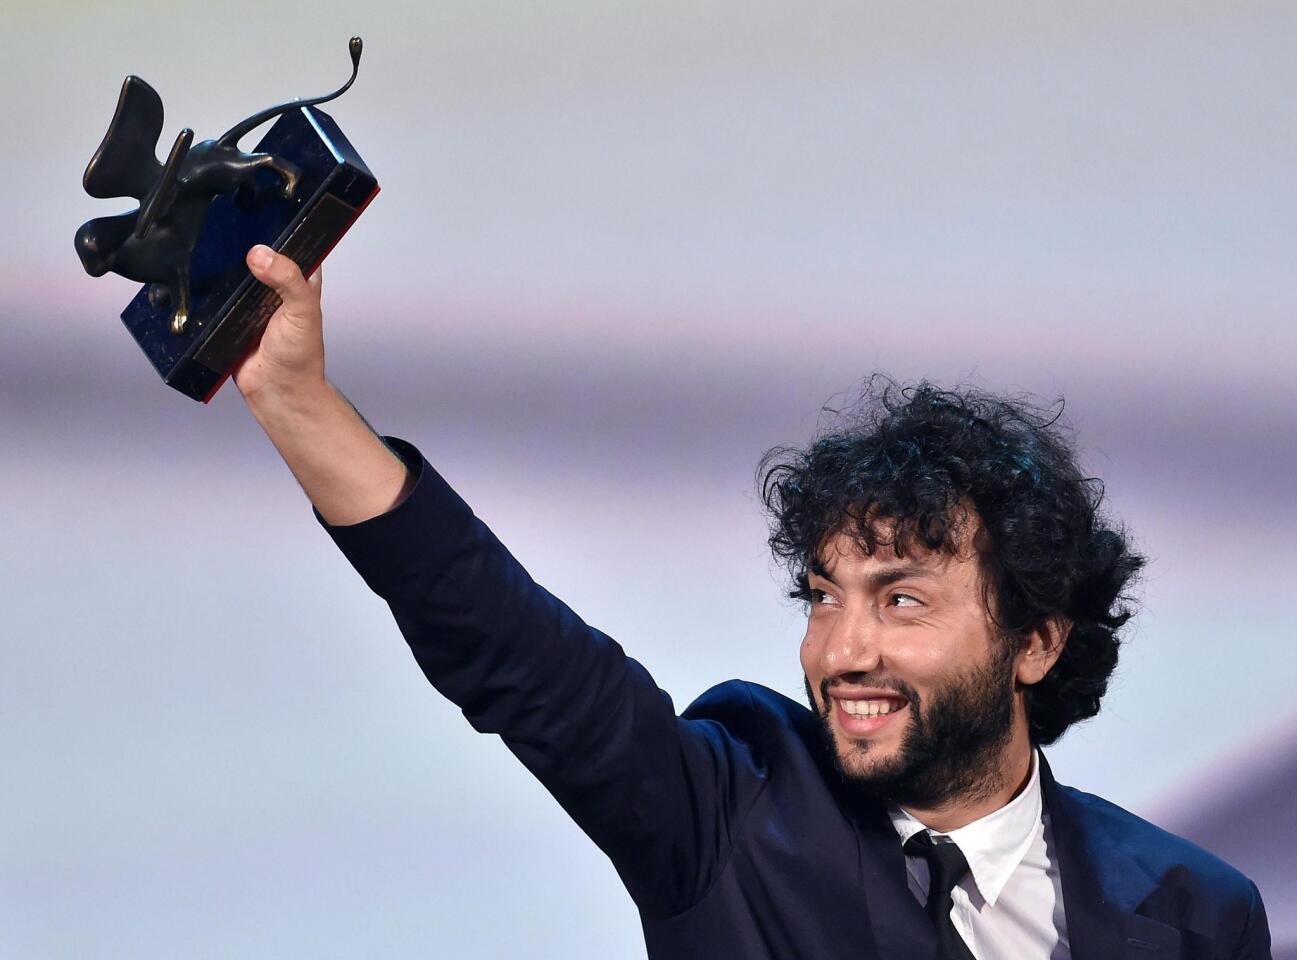 Turkish director Kaan Mujdeci holds the jury award for his movie "Sivas" at the festival.